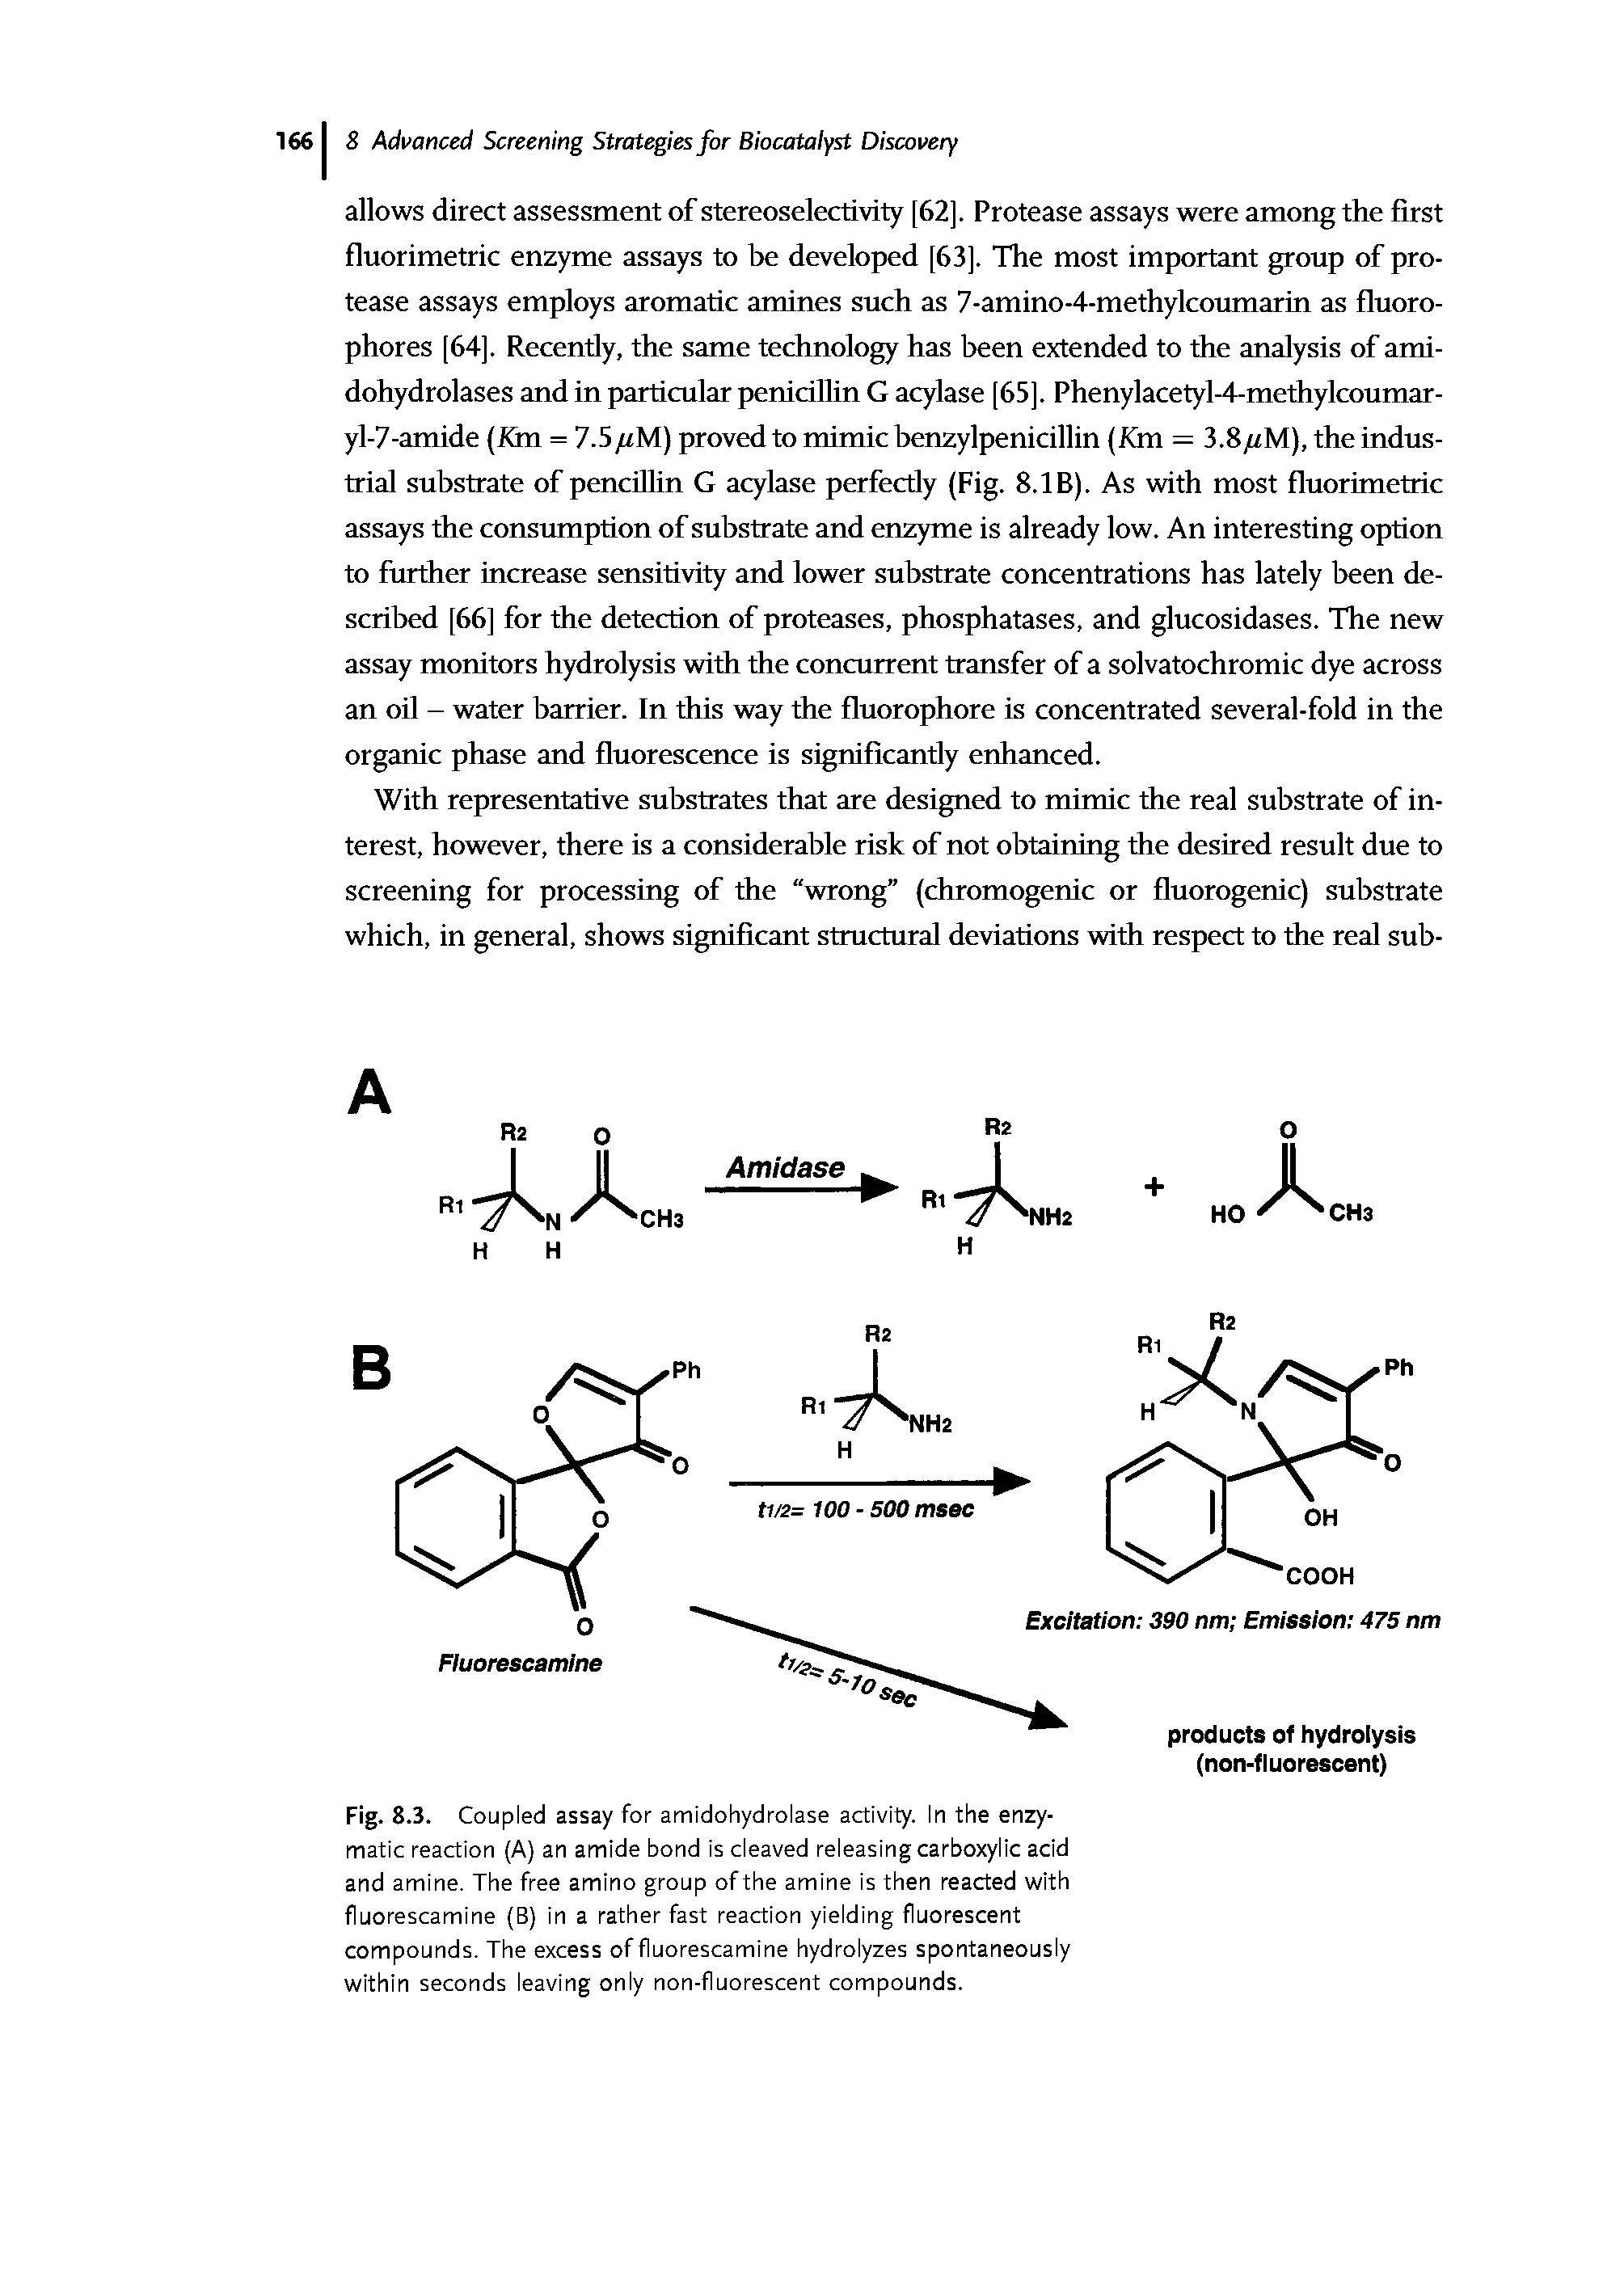 Fig. 8.3. Coupled assay for amidohydrolase activity. In the enzymatic reaction (A) an amide bond is cleaved releasing carboxylic acid and amine. The free amino group of the amine is then reacted with fluorescamine (B) in a rather fast reaction yielding fluorescent compounds. The excess of fluorescamine hydrolyzes spontaneously within seconds leaving only non-fluorescent compounds.